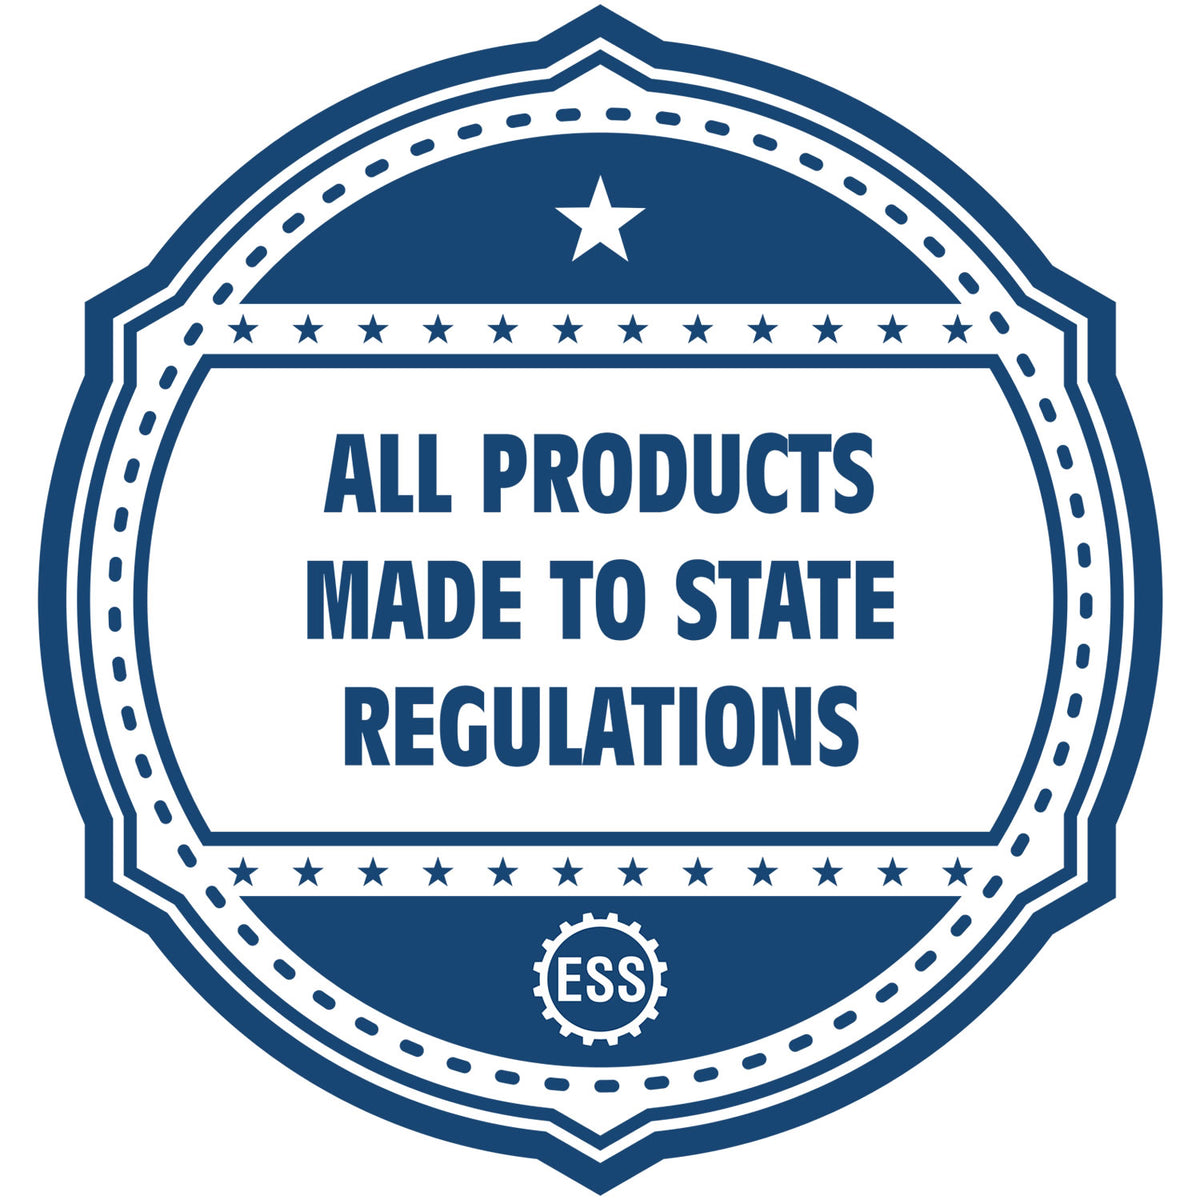 An icon or badge element for the Digital Arkansas PE Stamp and Electronic Seal for Arkansas Engineer showing that this product is made in compliance with state regulations.